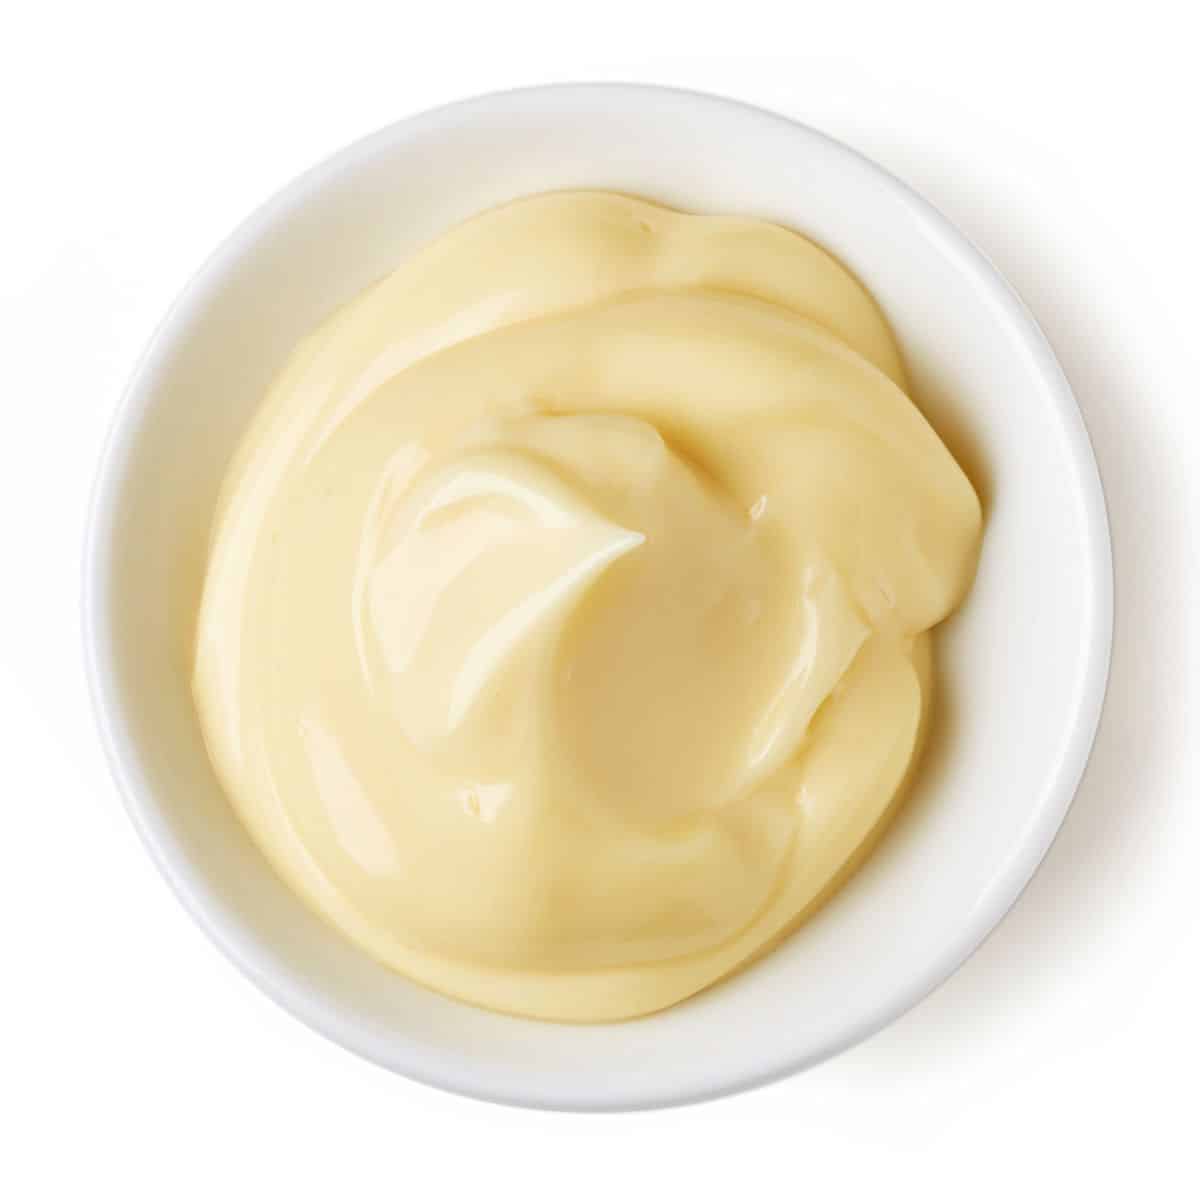 Mayo in a bowl on a white background.